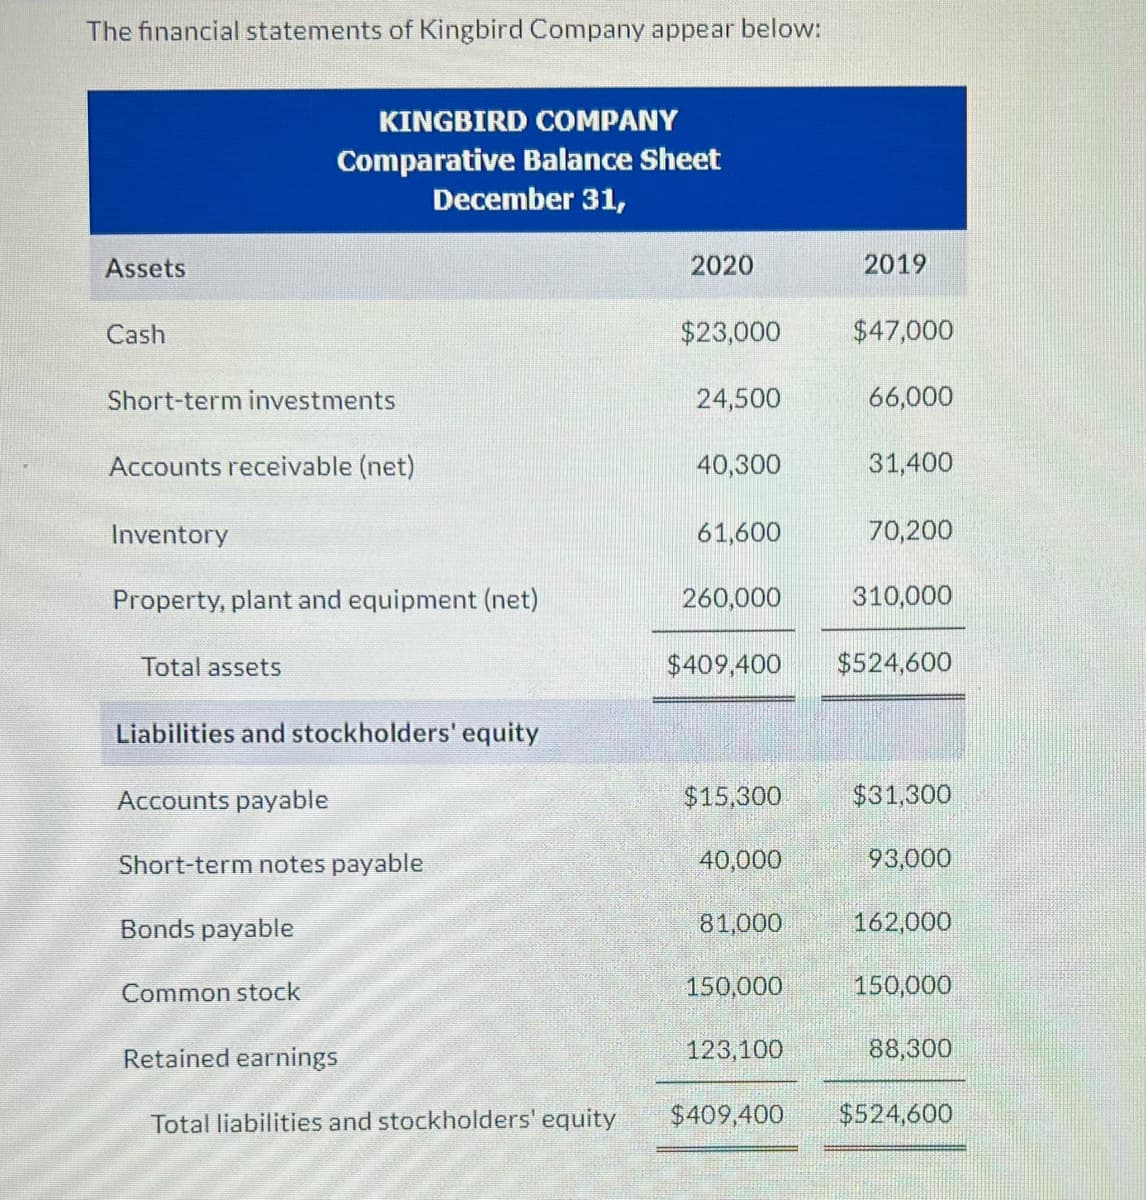 The financial statements of Kingbird Company appear below:
KINGBIRD COMPANY
Comparative Balance Sheet
December 31,
Assets
2020
2019
Cash
$23,000
$47,000
Short-term investments
24,500
66,000
Accounts receivable (net)
40,300
31,400
Inventory
61,600
70,200
Property, plant and equipment (net)
260,000
310,000
Total assets
$409,400 $524,600
Liabilities and stockholders' equity
Accounts payable
$15,300
$31,300
Short-term notes payable
40,000
93,000
Bonds payable
81,000
162,000
Common stock
150,000
150,000
Retained earnings
123,100
88,300
Total liabilities and stockholders' equity
$409,400
$524,600